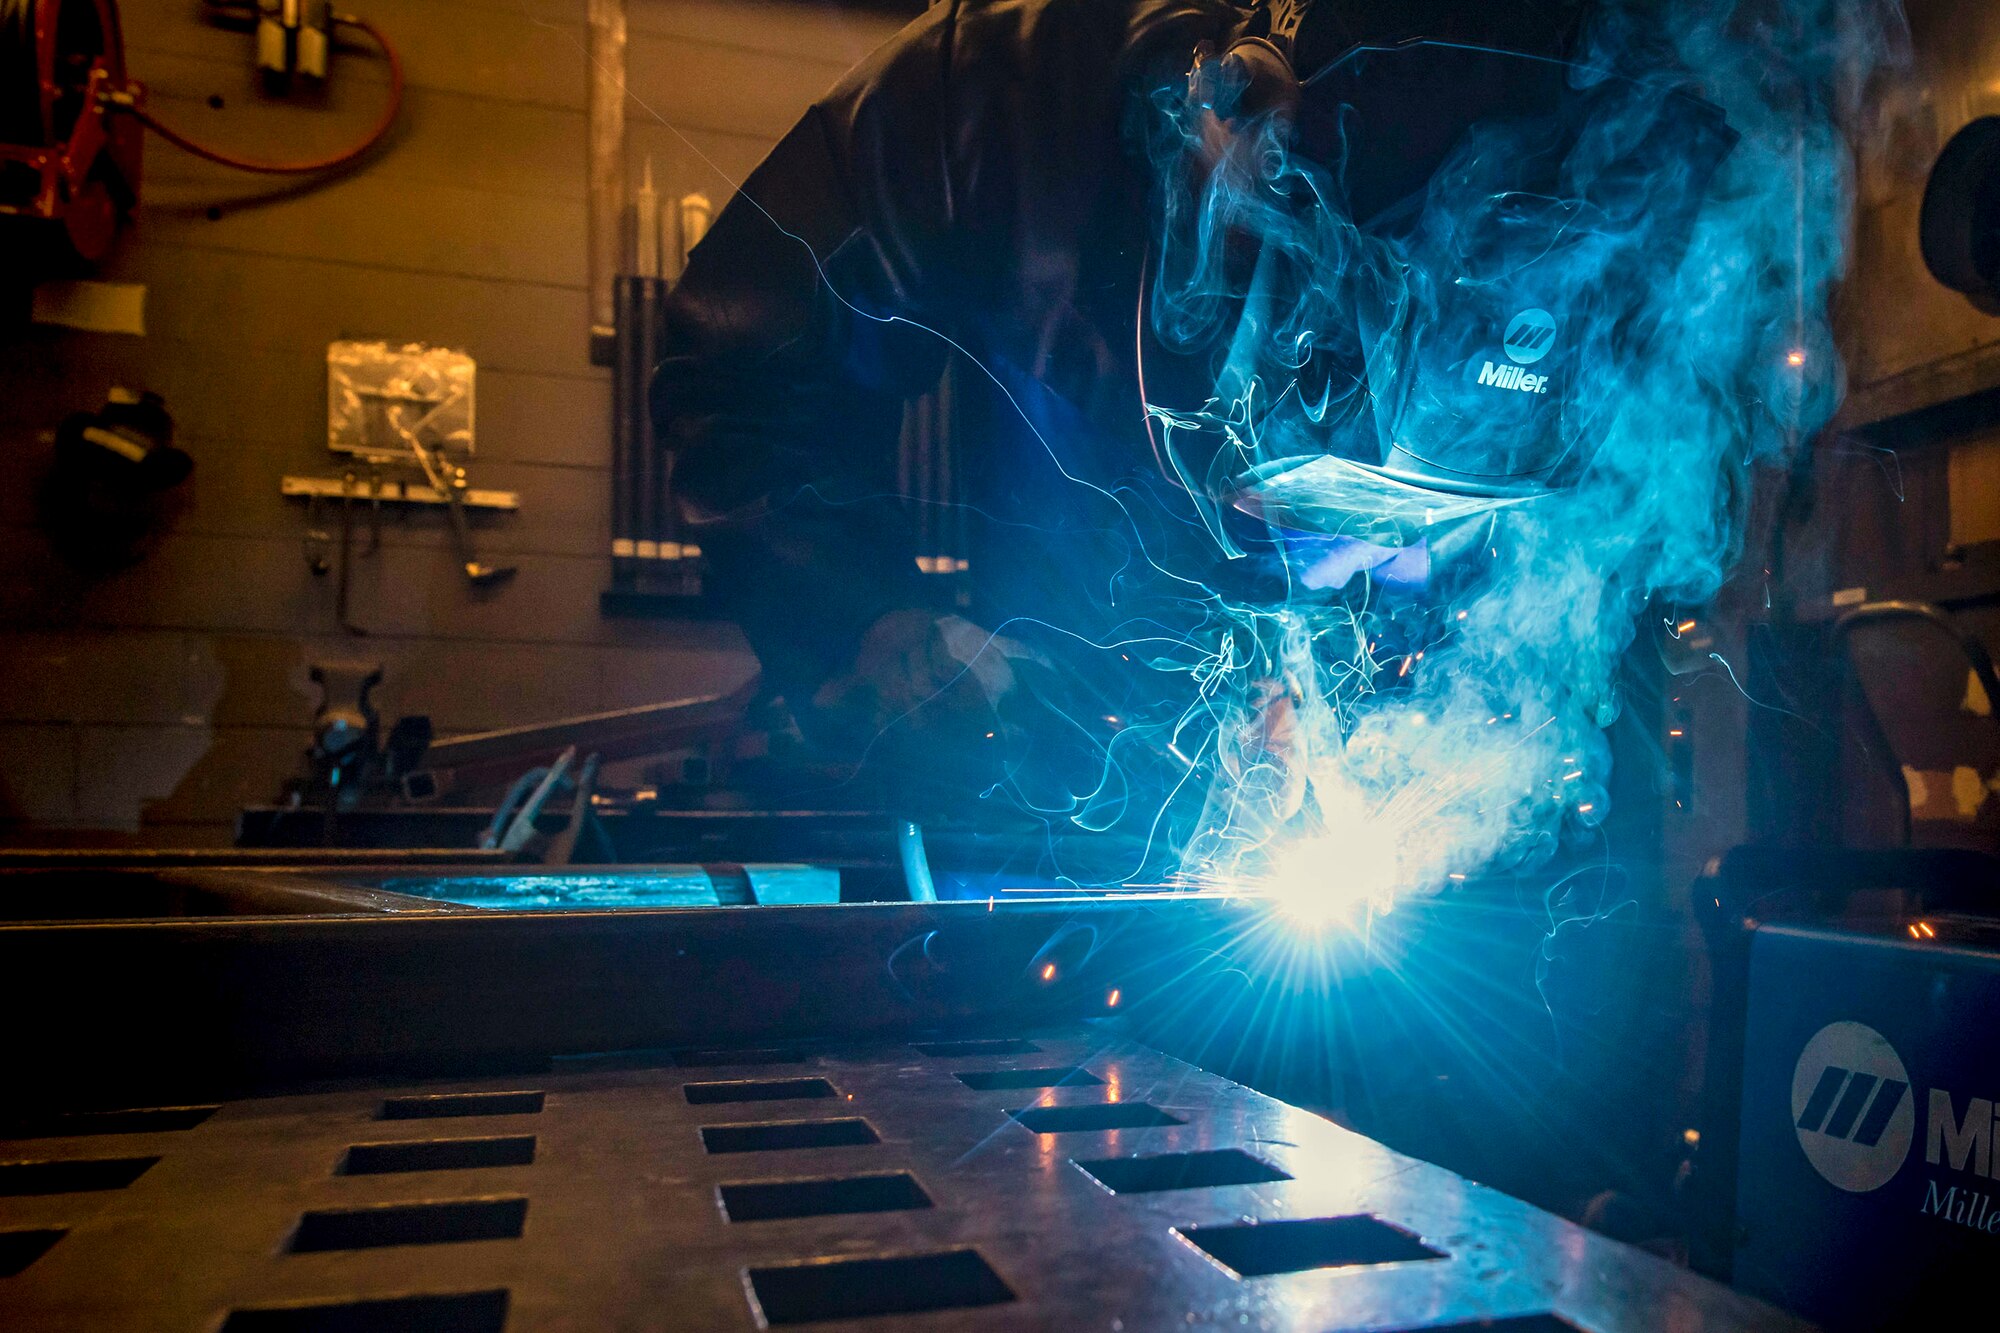 Airman 1st Class Isaiah Jackson, 23rd Maintenance Squadron aircraft metals technology journeyman, welds components of a table, April 25, 2018, at Moody Air Force Base, Ga. Metals technicians support the mission by utilizing fabrication techniques to repair and overhaul countless tools and aircraft parts. The technicians strive to exercise safe and precise fabrication techniques to be able to sufficiently handle their intense workload. (U.S. Air Force photo by Airman 1st Class Eugene Oliver)